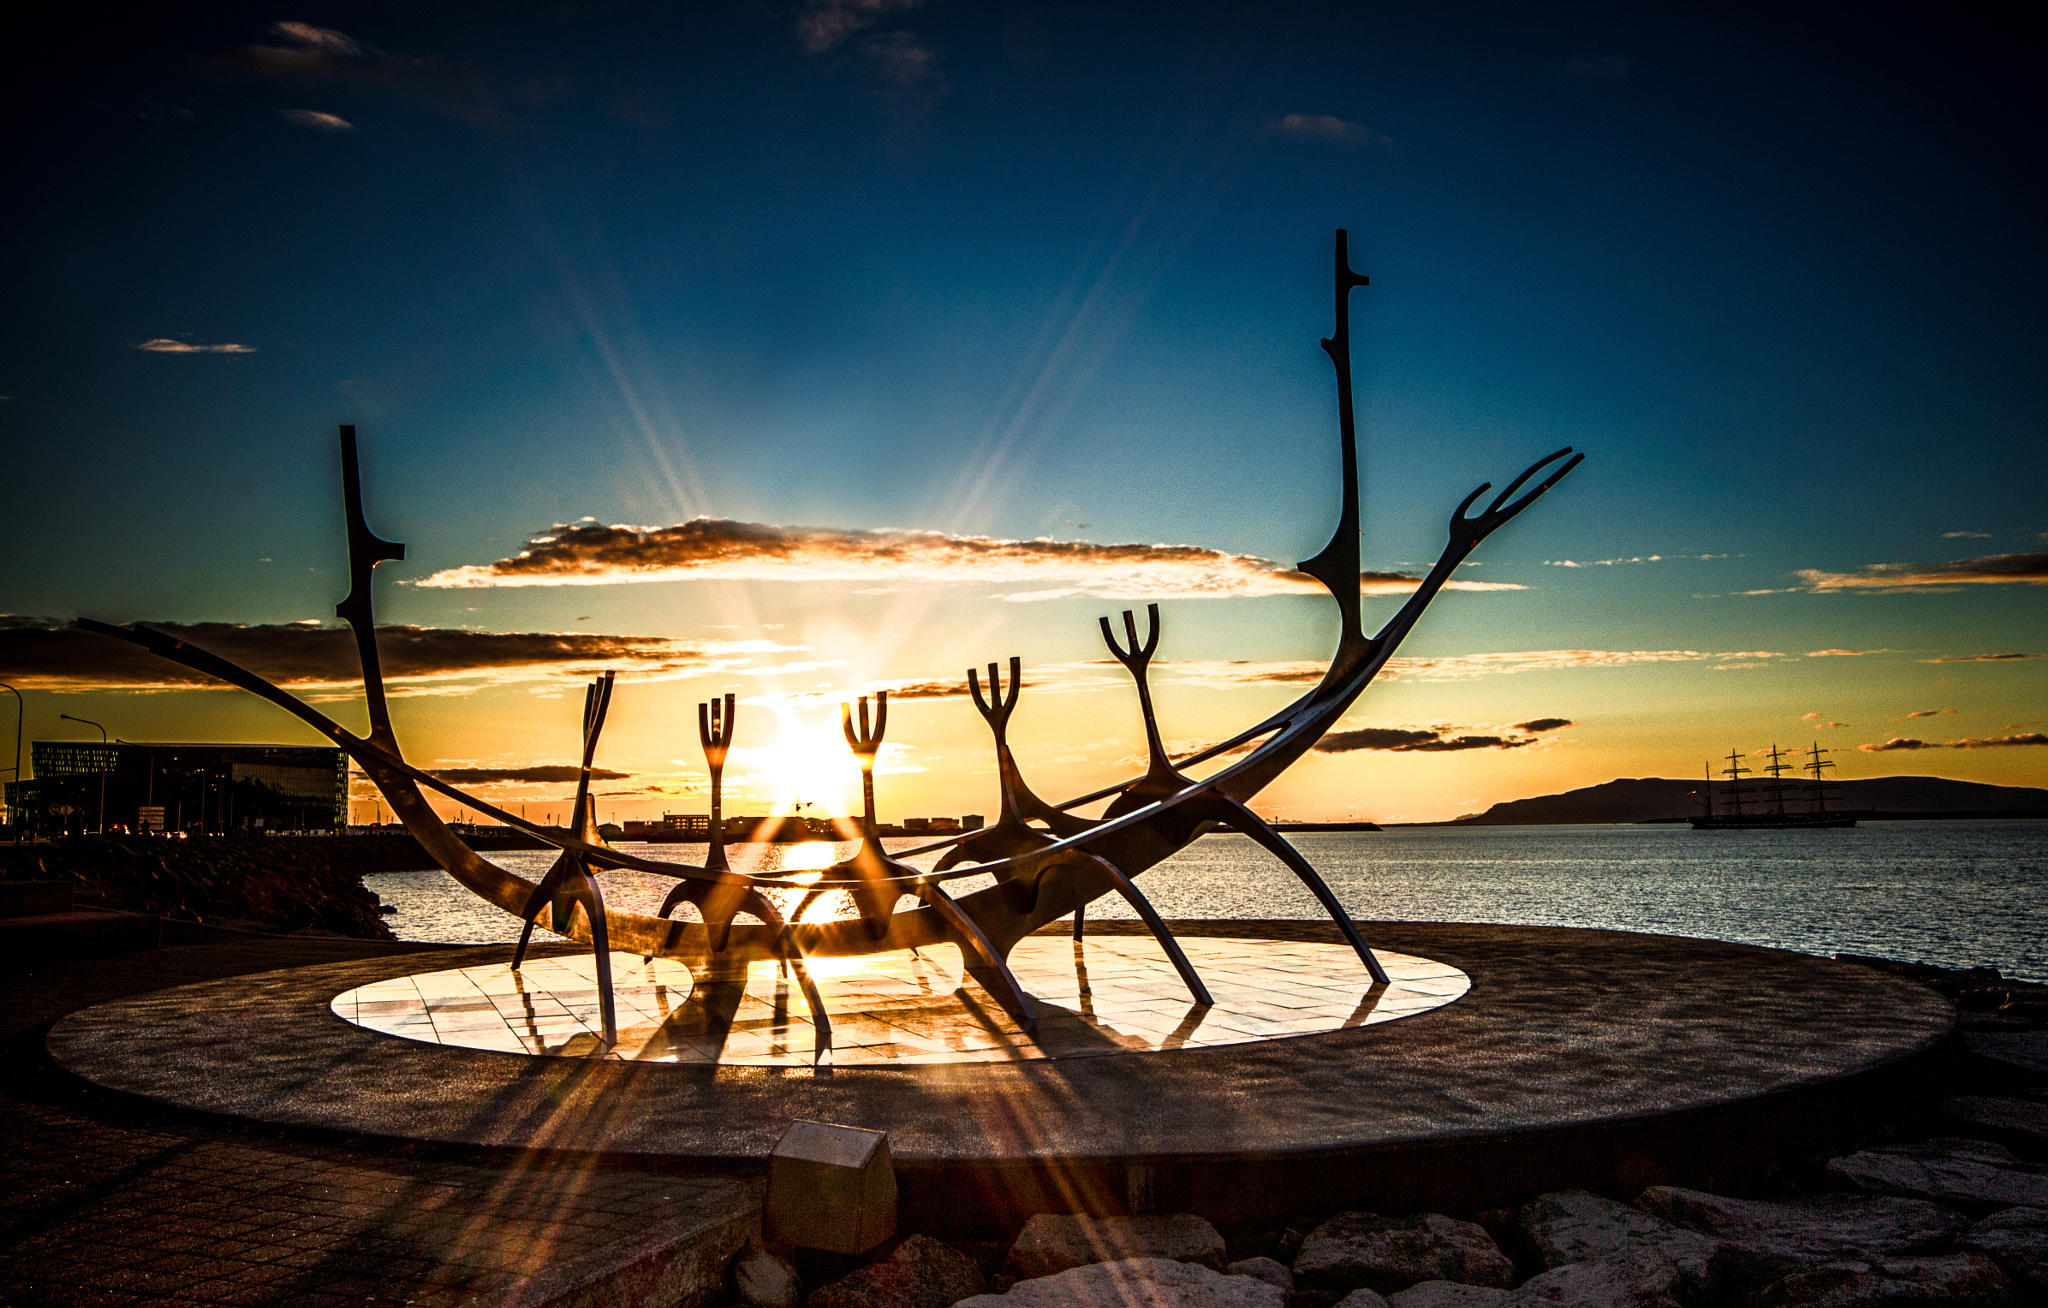 Sun Voyager in the sunlight